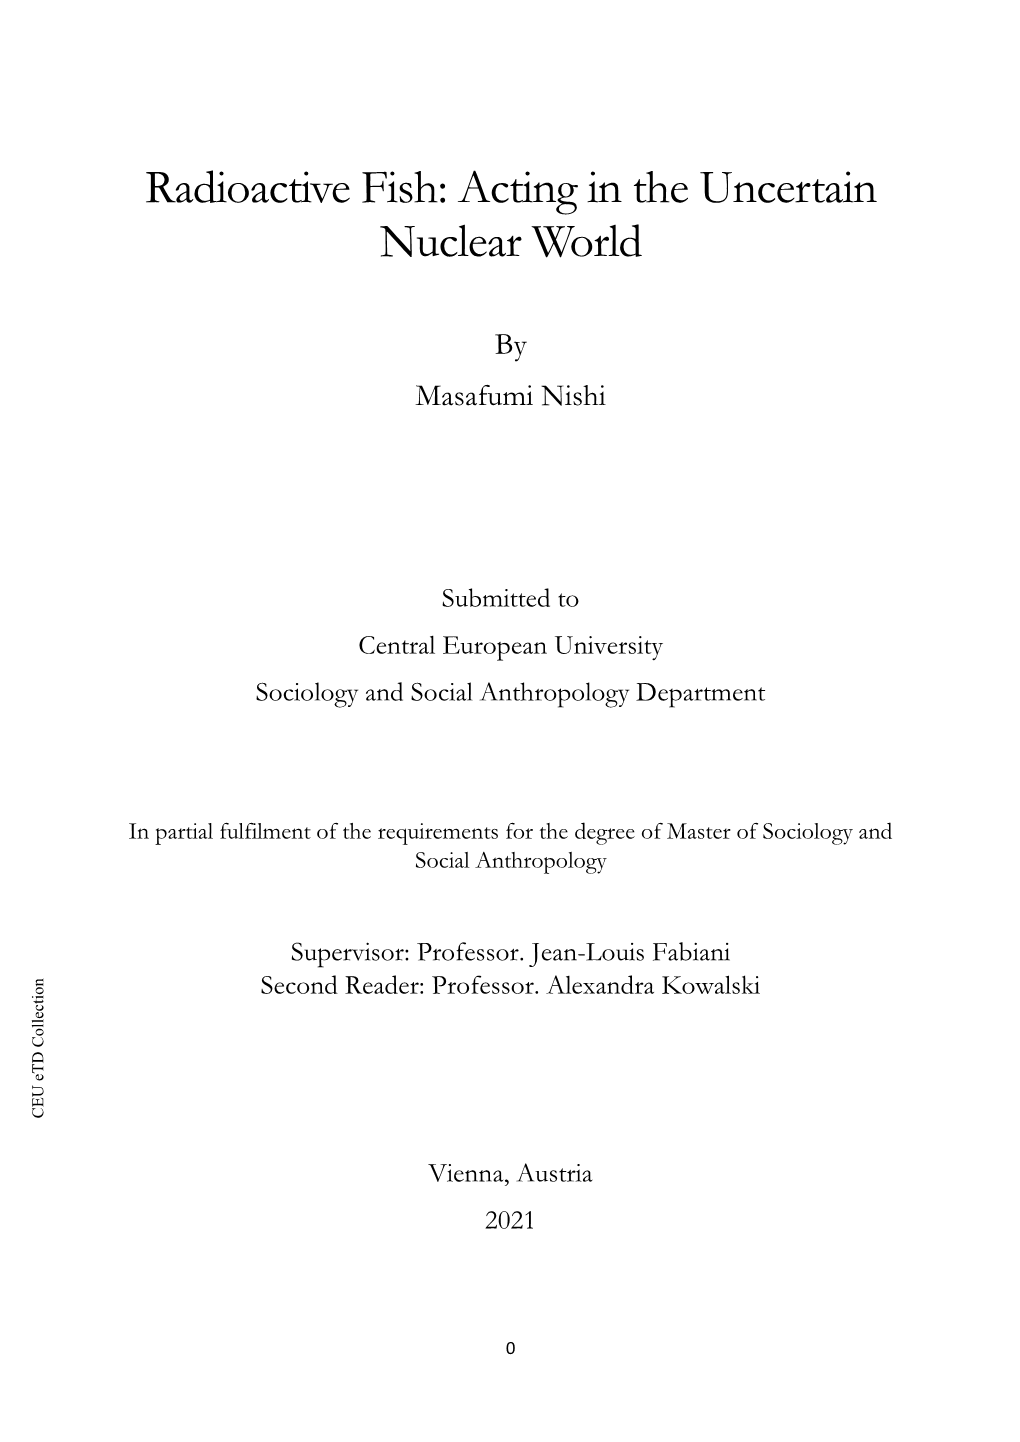 Radioactive Fish: Acting in the Uncertain Nuclear World